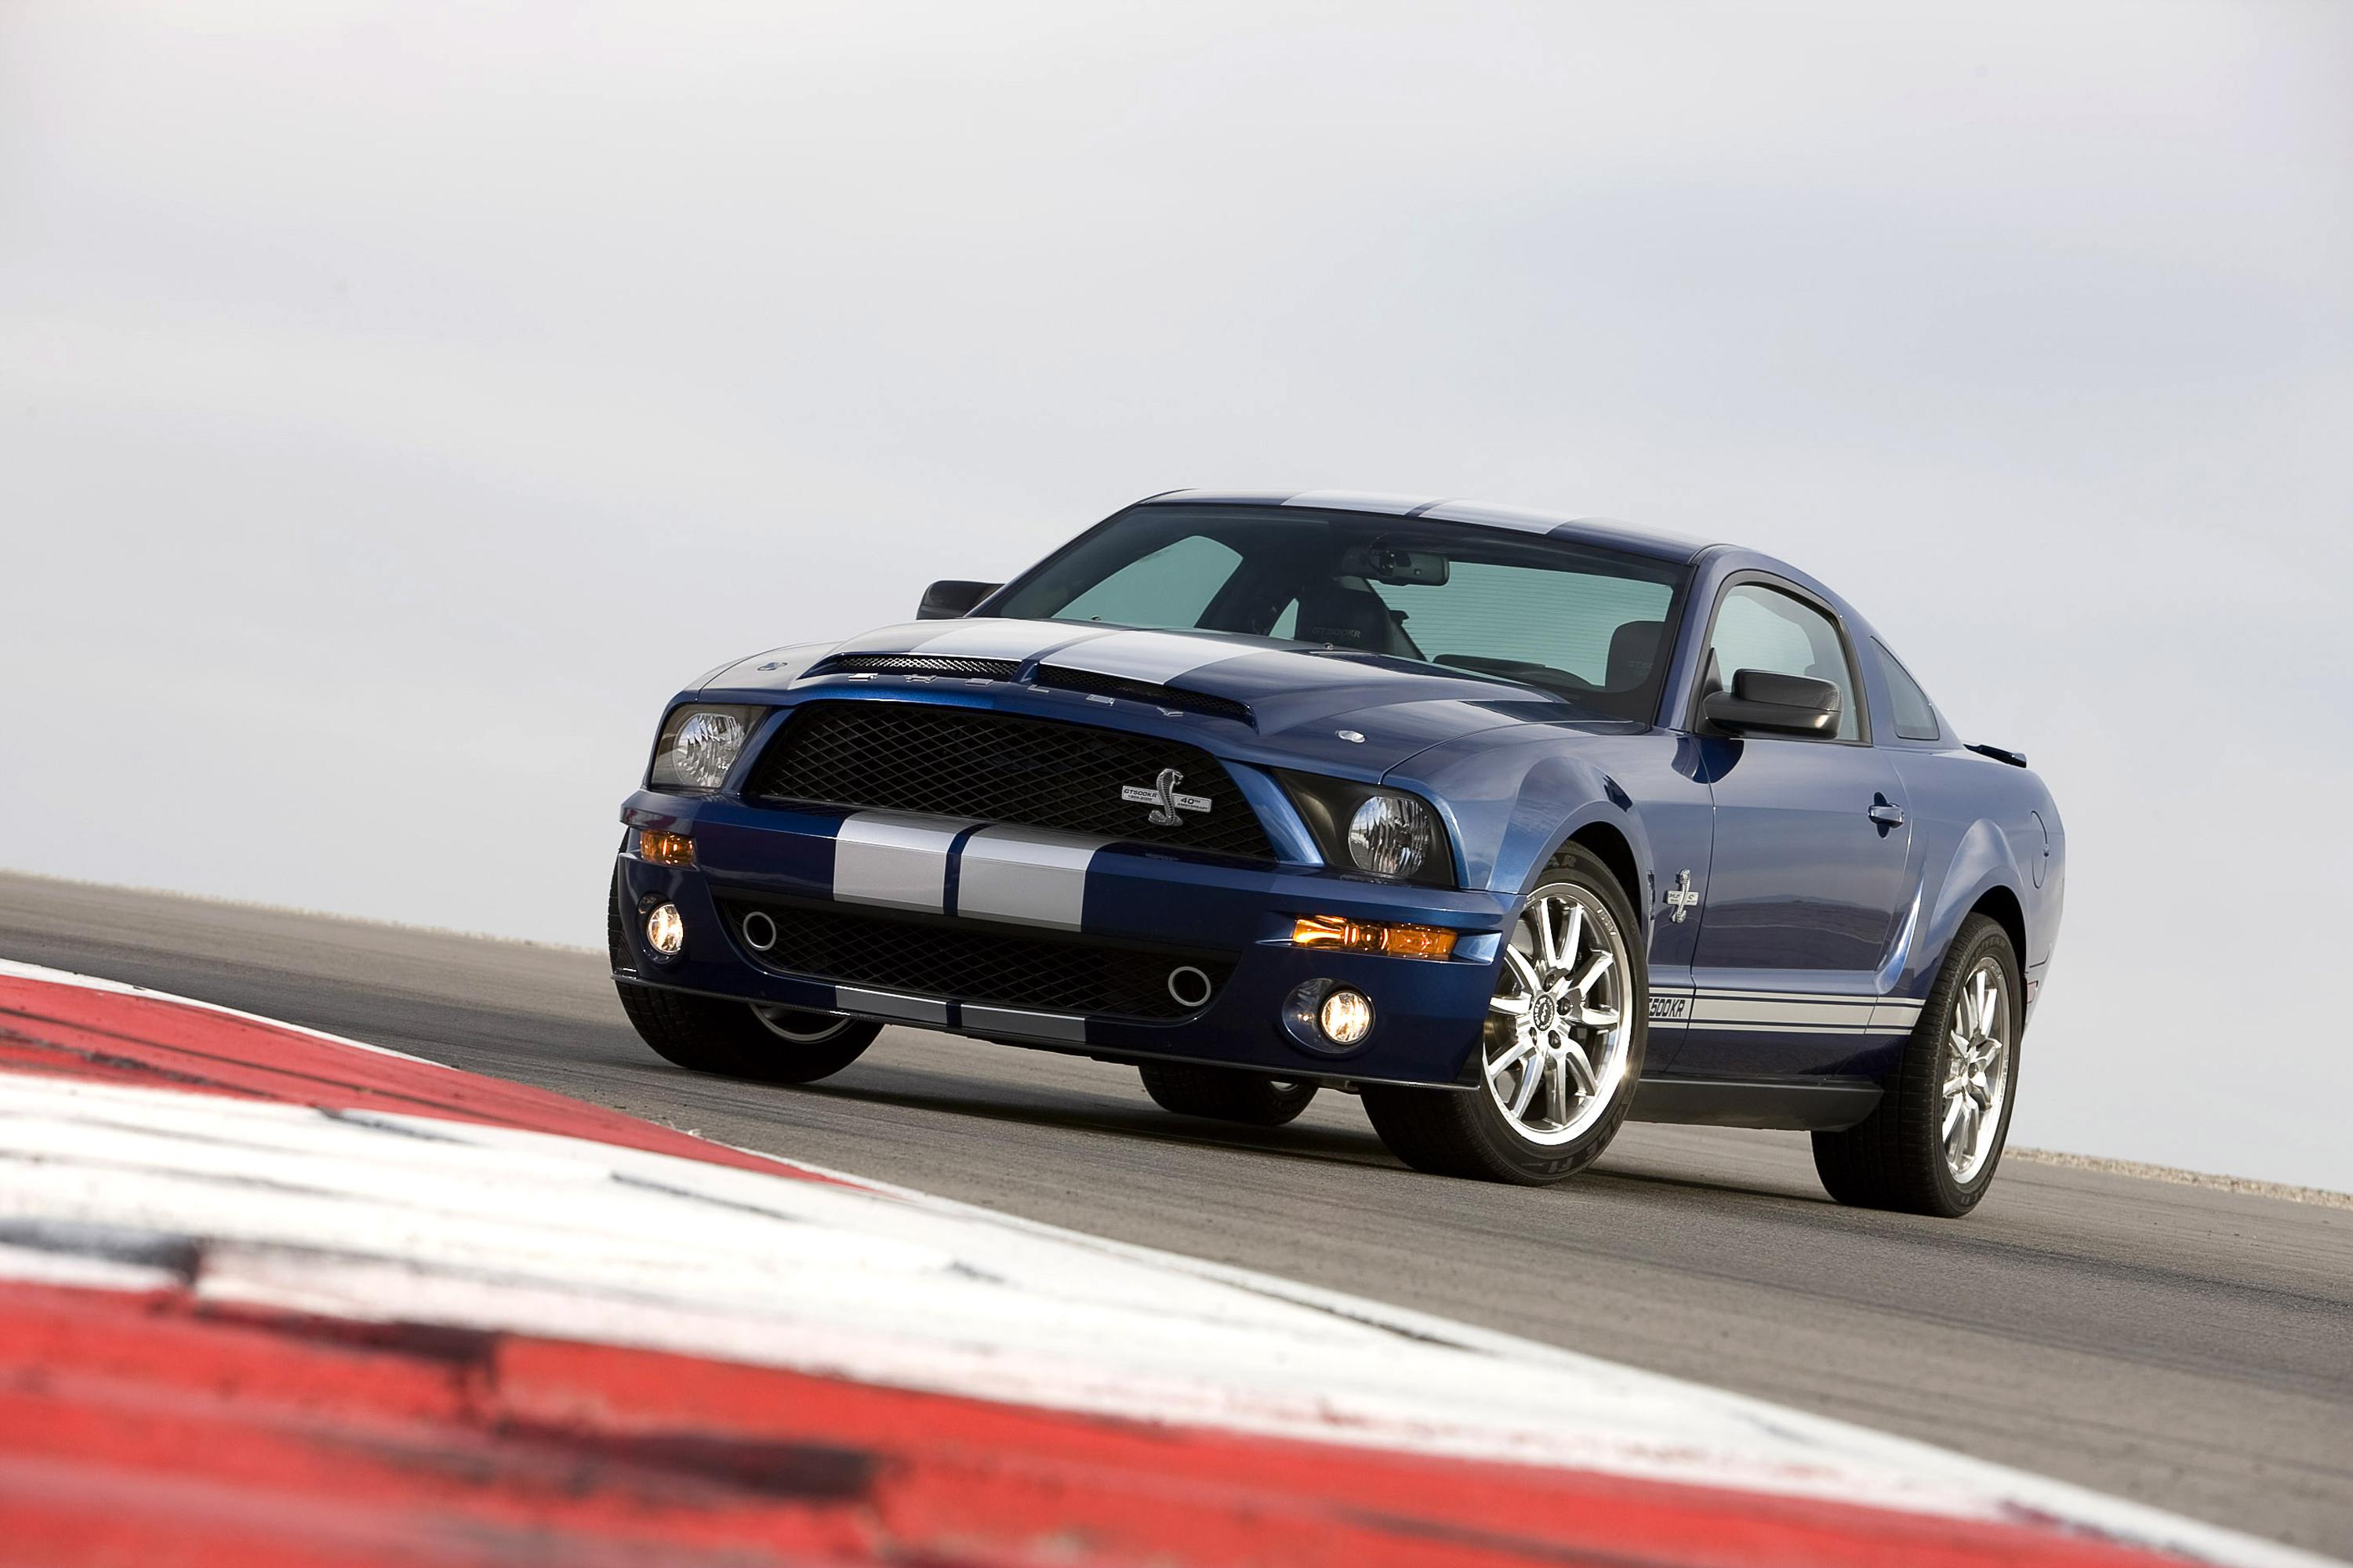 Мустанг 2008. Форд Мустанг Шелби gt 500. Ford Mustang Shelby gt500kr 2008. Ford Mustang gt500kr. 2008 Ford Shelby gt.